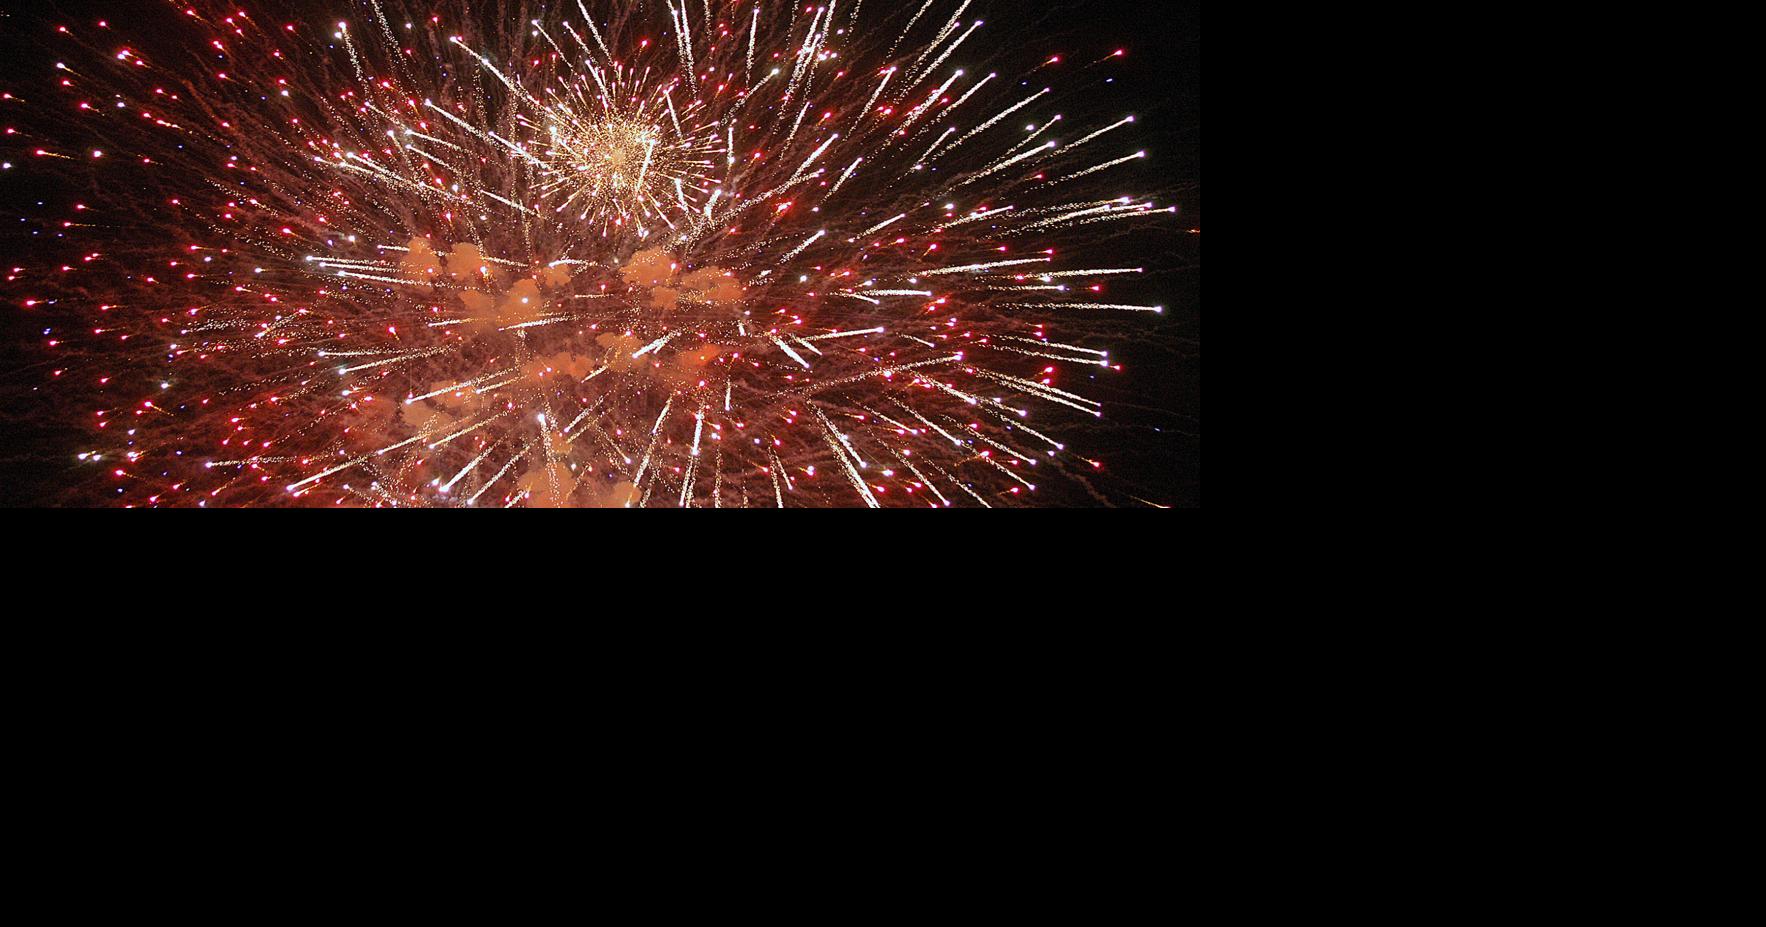 Rancho Cucamonga will have fireworks show on July 4 Entertainment